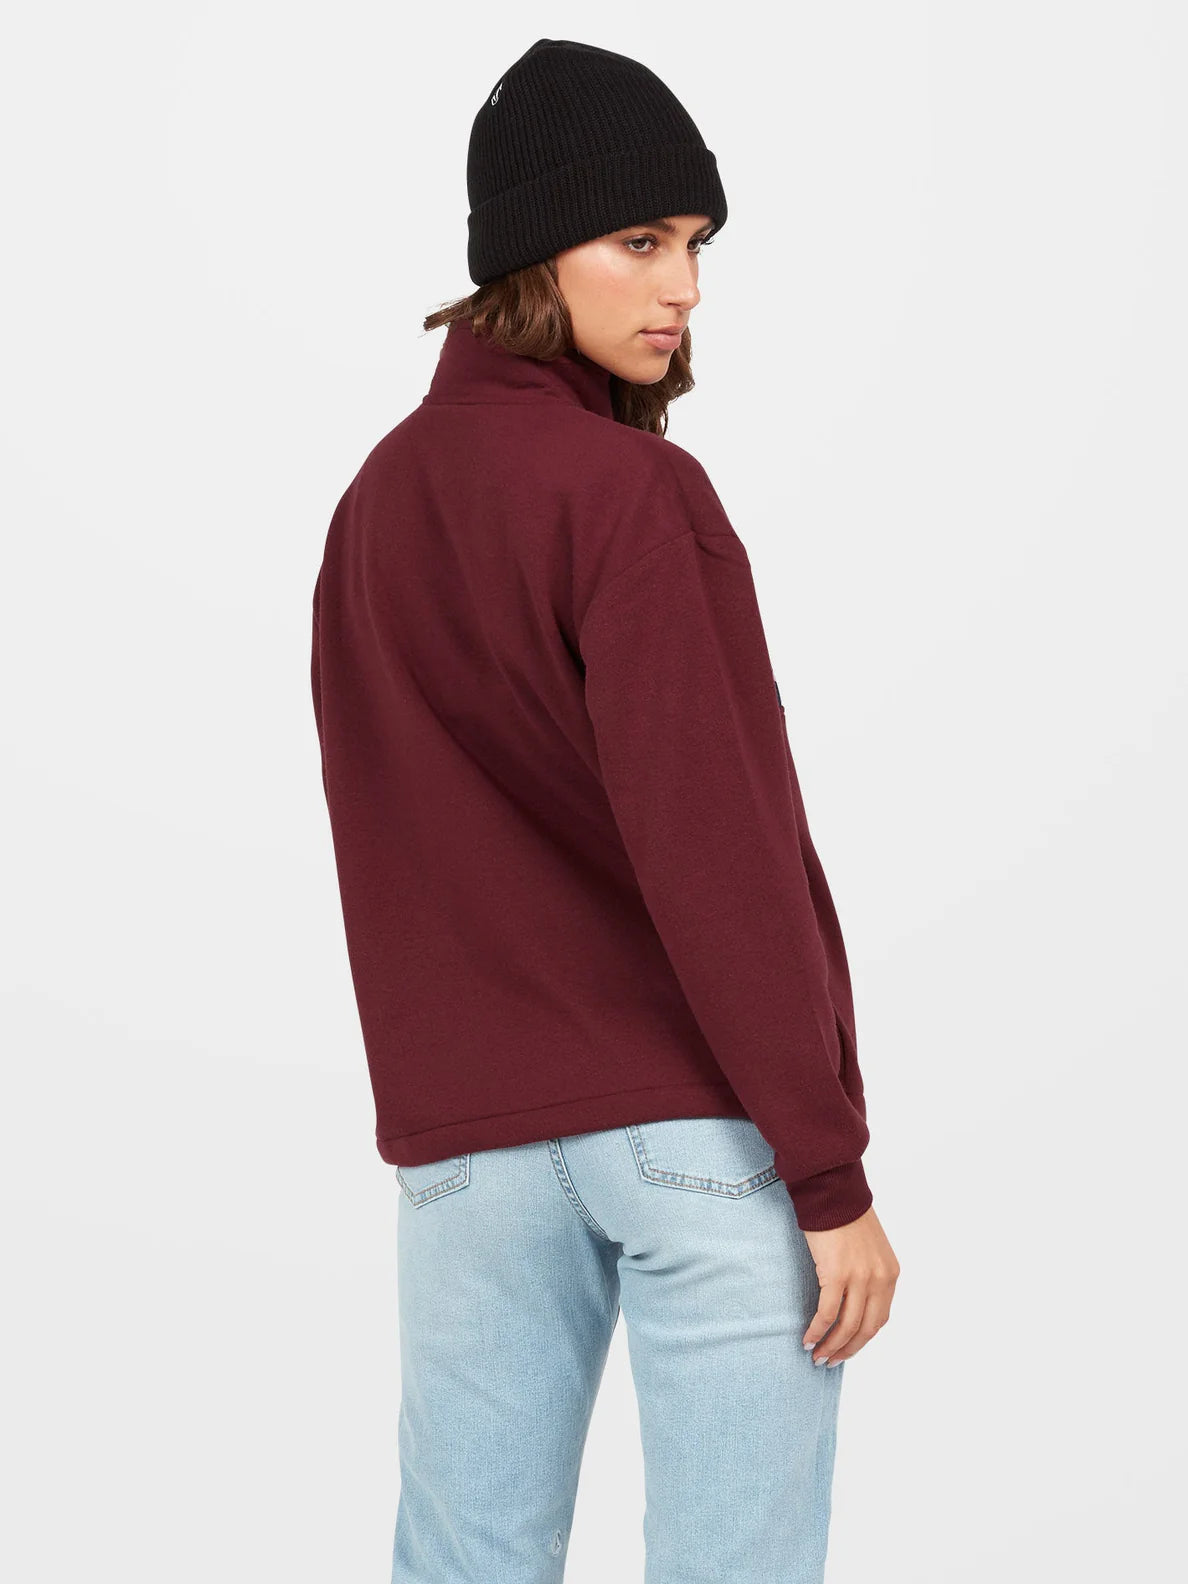 Sweat Volcom Stone Stacked Bordeaux pour Fille